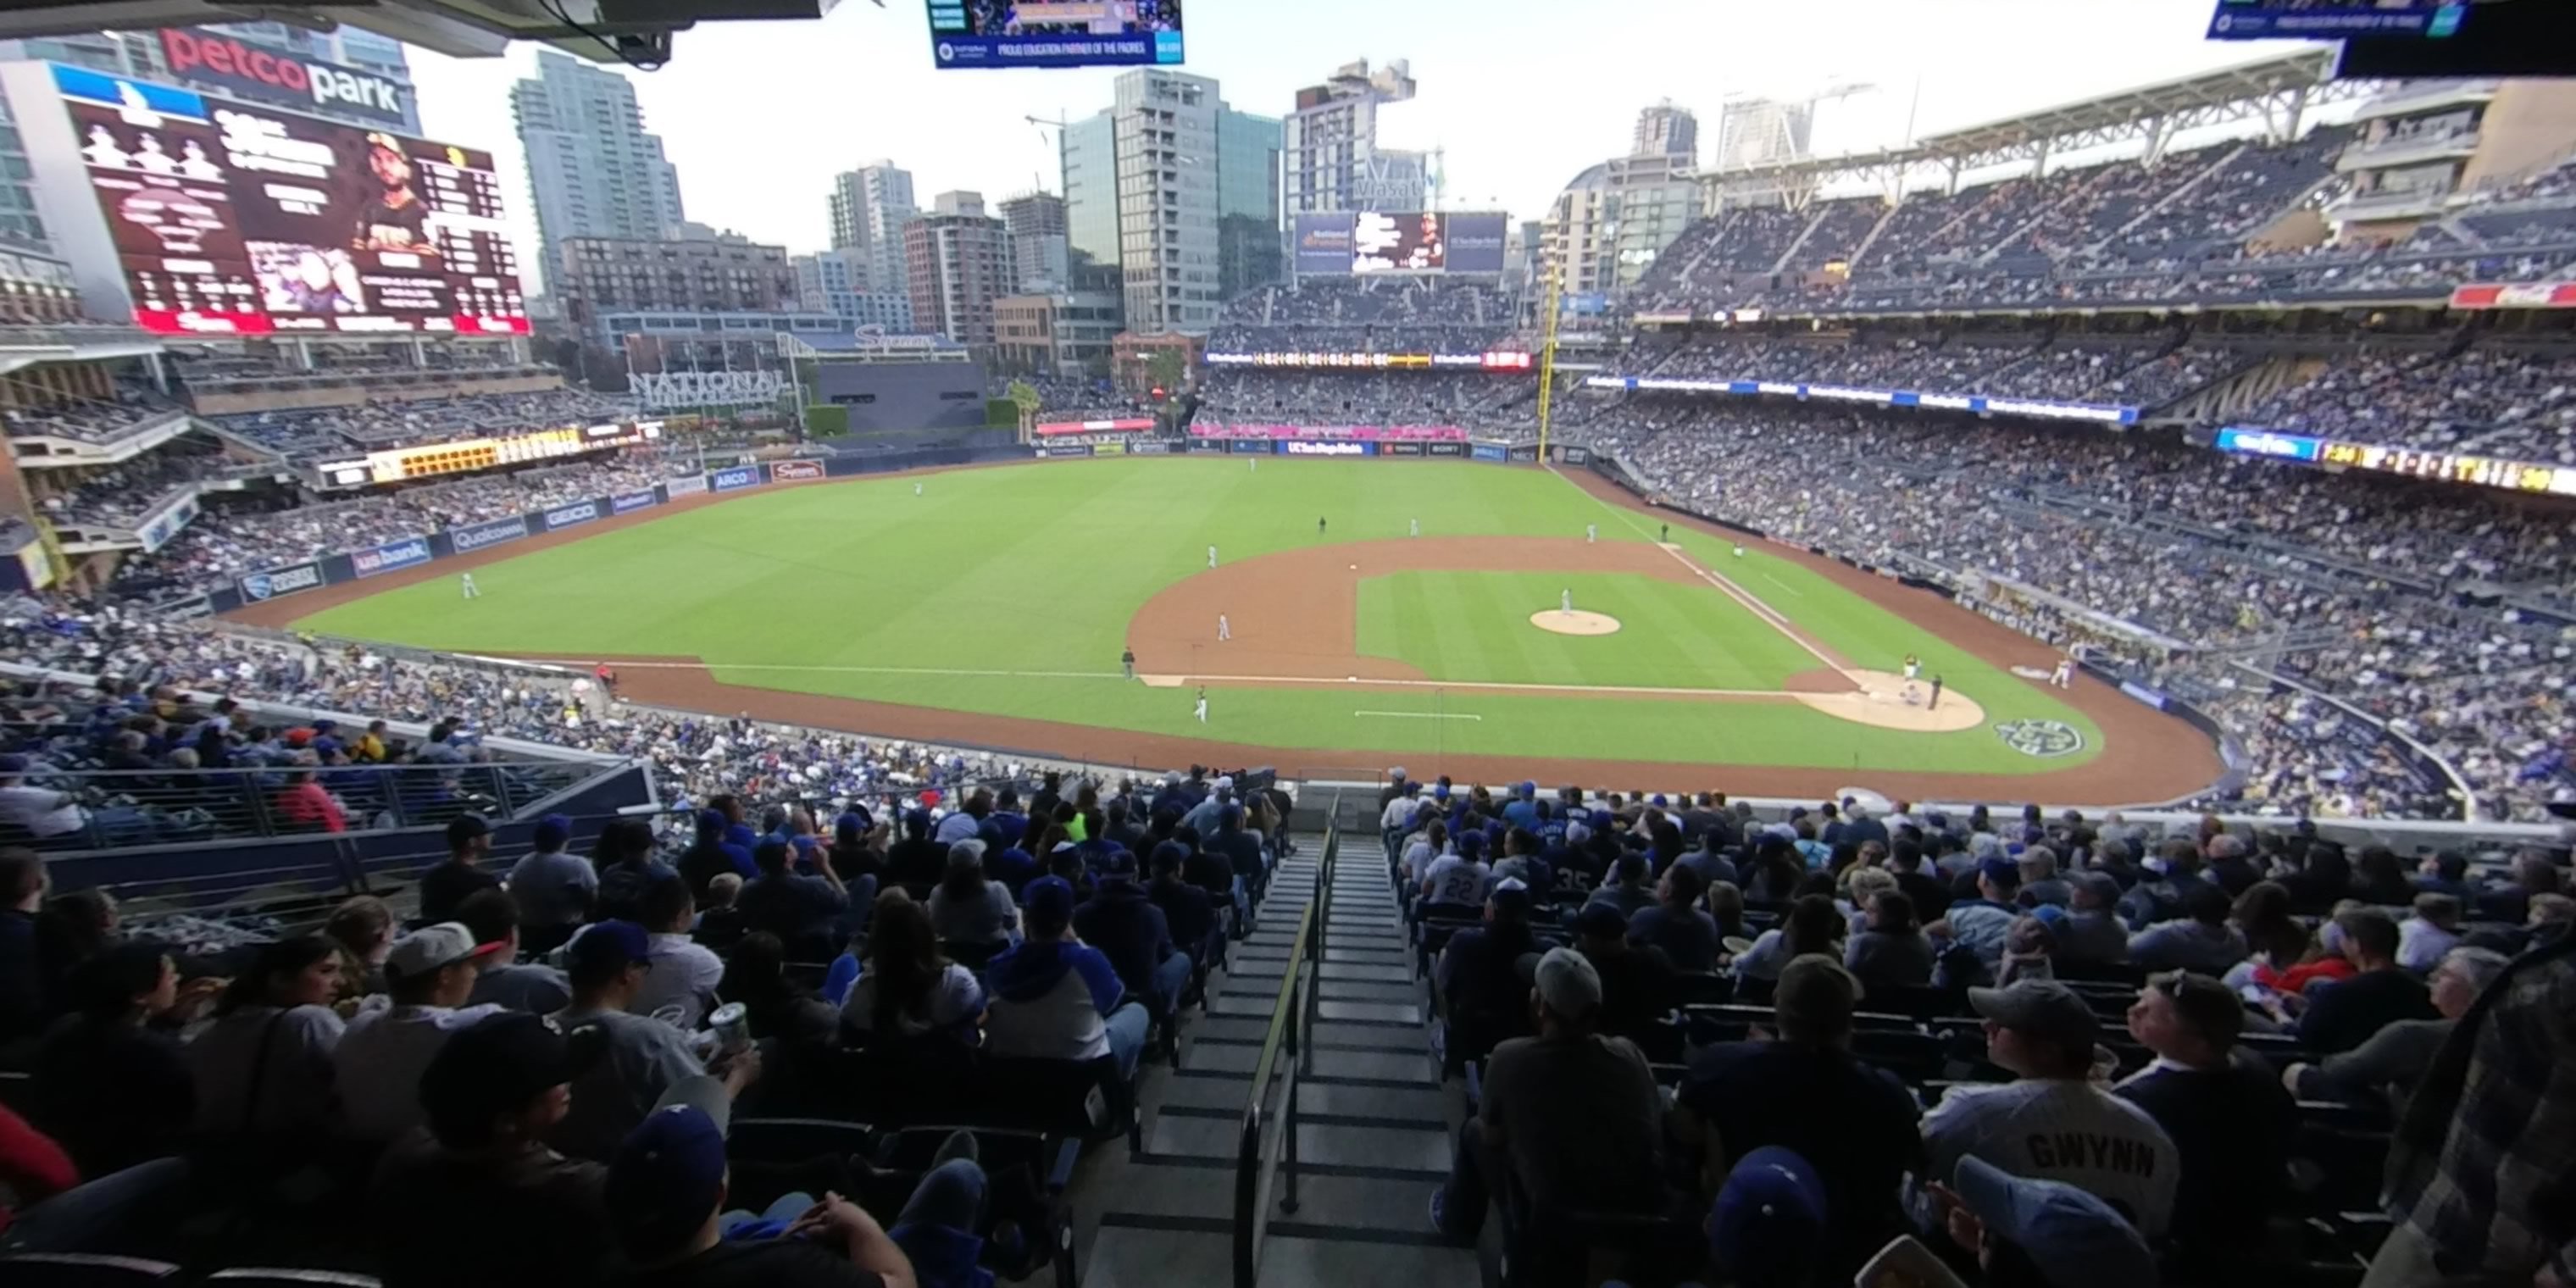 section 208 panoramic seat view  for baseball - petco park